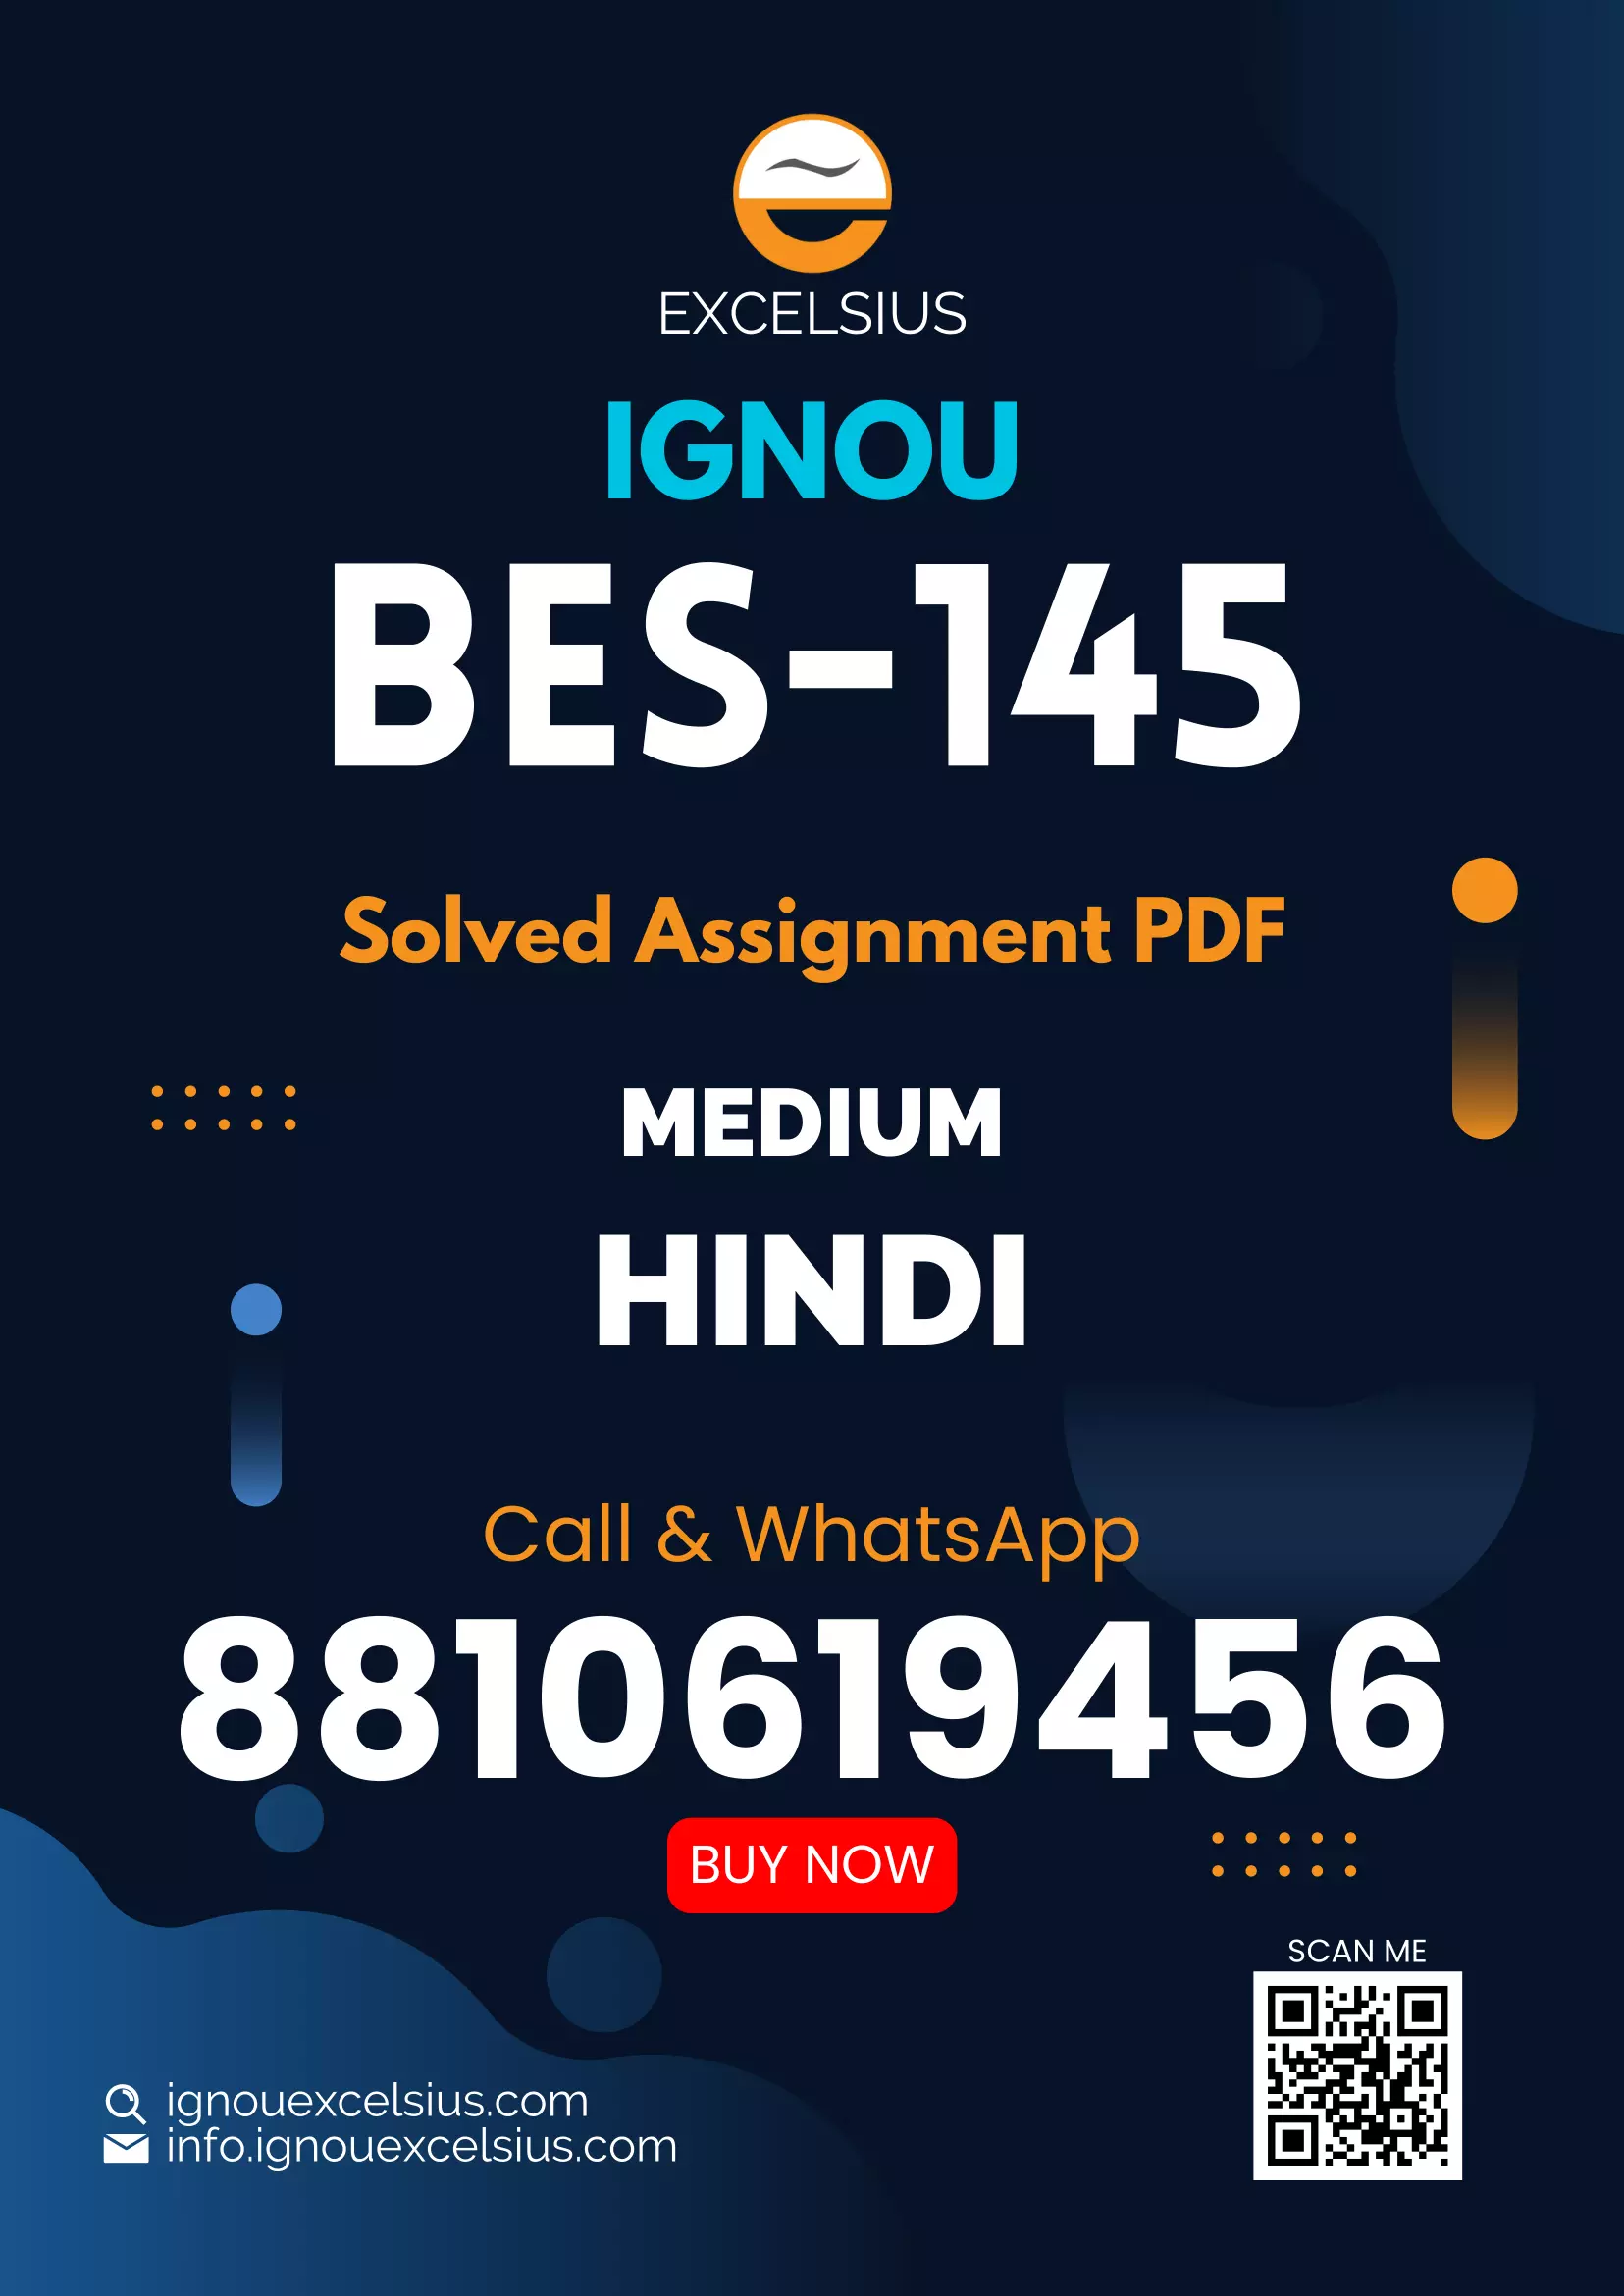 IGNOU BES-145 - Pedagogy of English, Latest Solved Assignment-January 2022